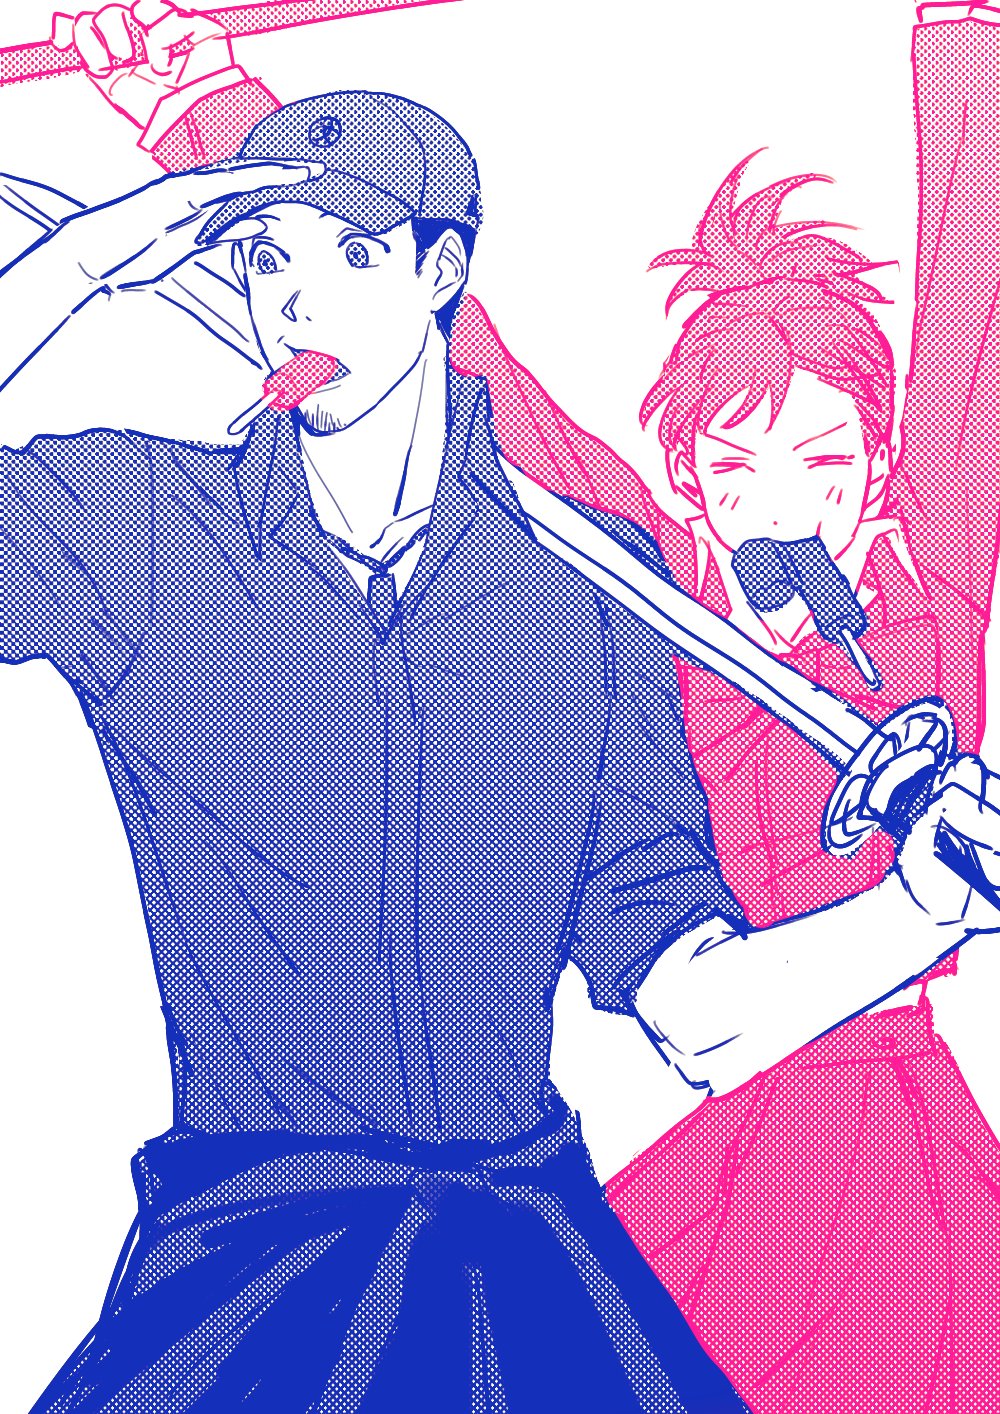 1boy 1girl arms_up bow bowtie closed_eyes collared_shirt food food_in_mouth hands_on_headwear hat highres holding holding_sword holding_weapon iori_junpei jacket jewelry necklace persona persona_3 persona_3_portable ponytail popsicle school_uniform shiomi_kotone shirt sleeve_rolled_up sword tied_jacket weapon white_background yongari_shin